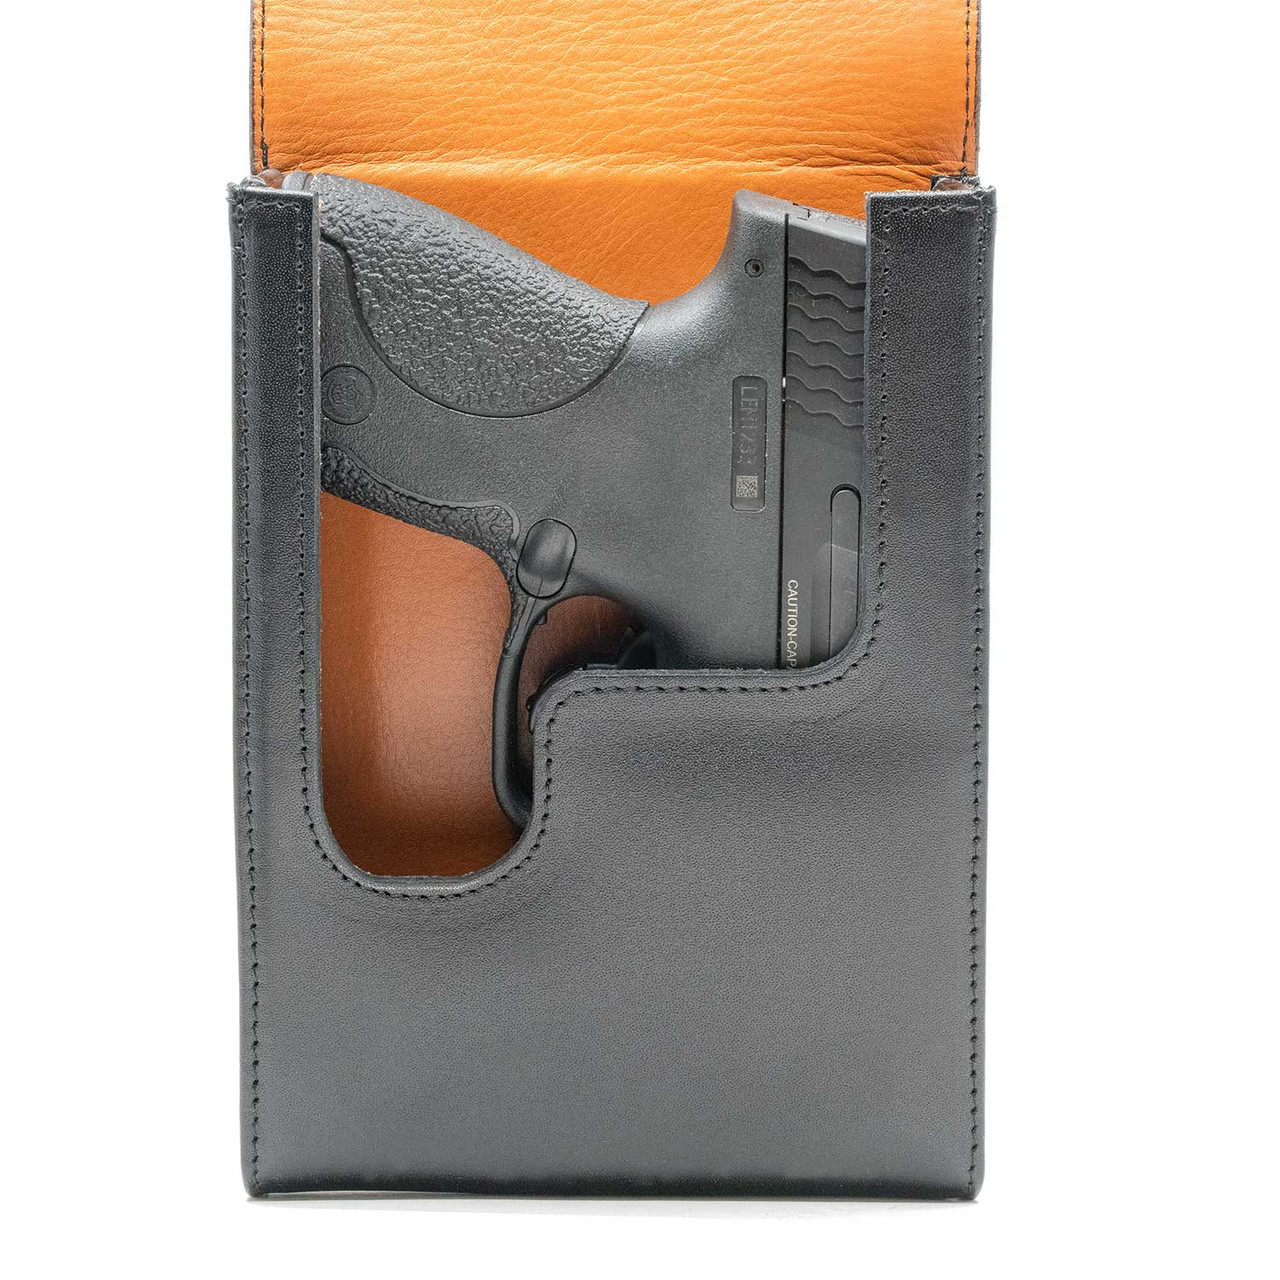 The Taurus G2C Xtra Mag Black Leather Holster